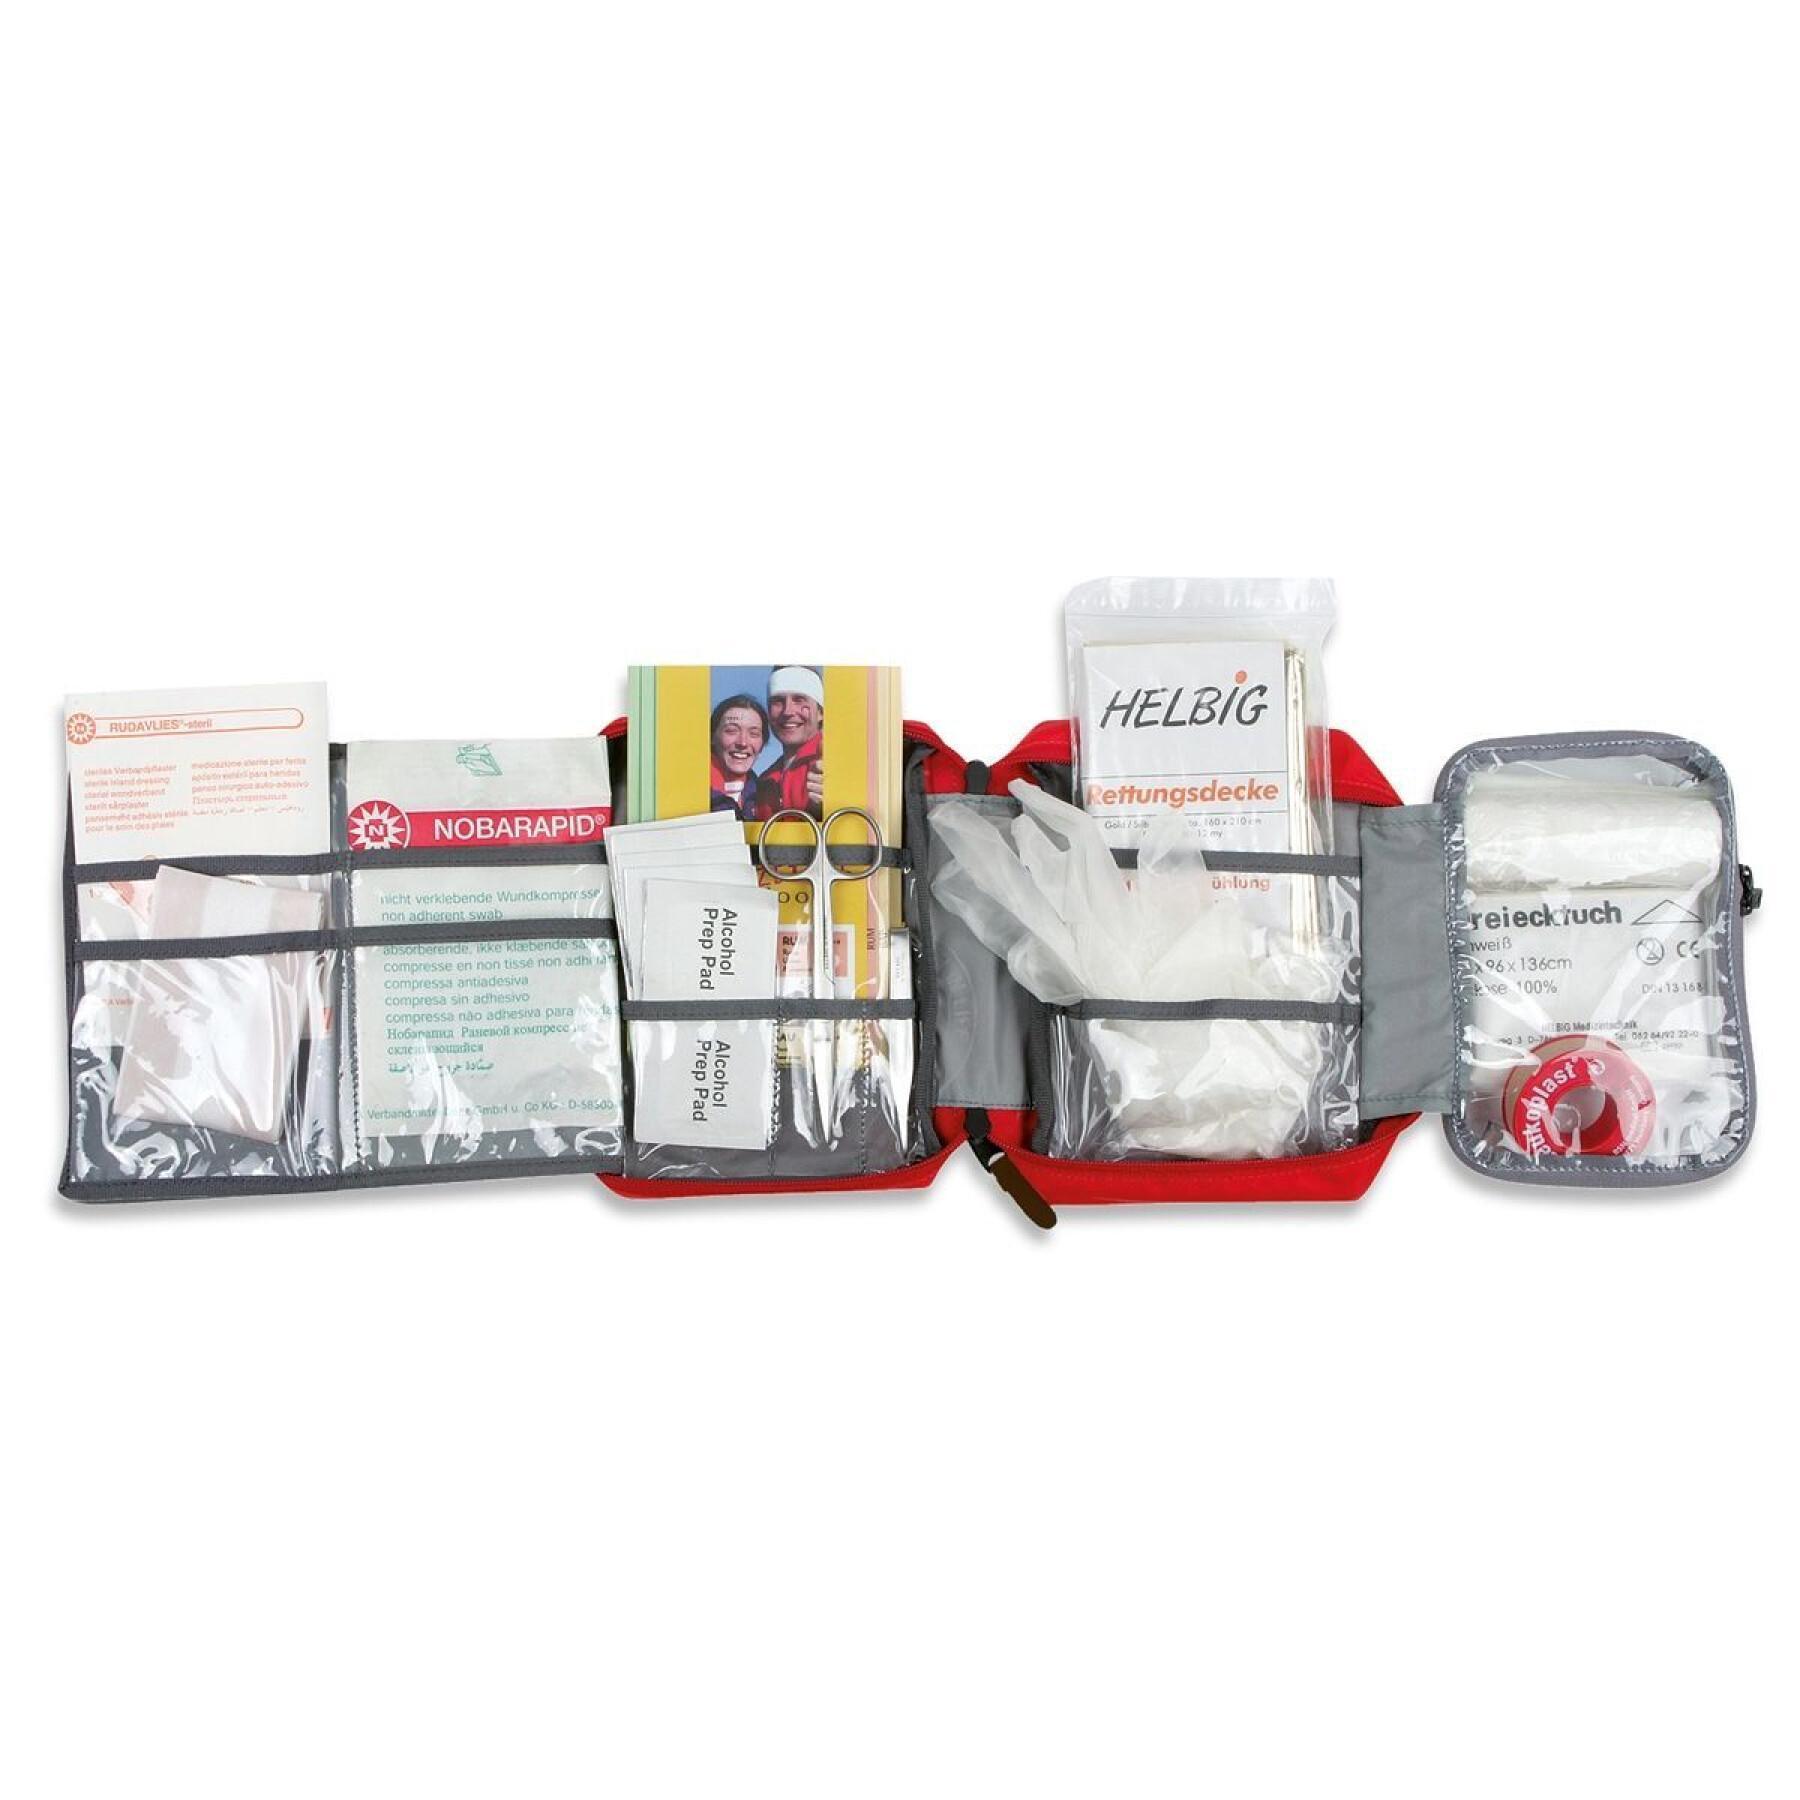 First aid kit 2 to 3 days for 2 people Tatonka First Aid Compact